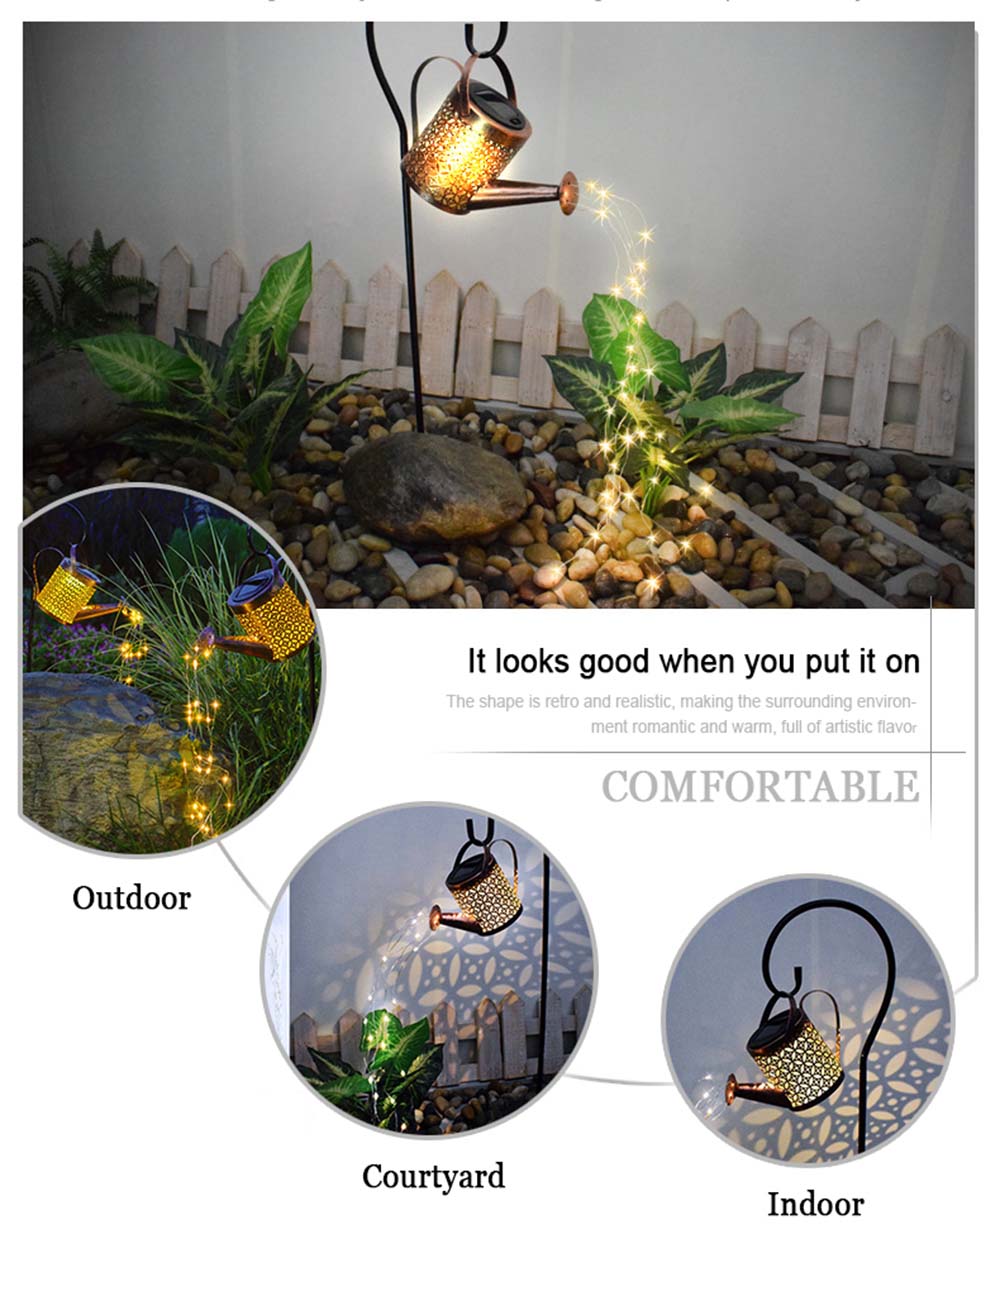 Solar-Light-LED-Solar-Watering-Can-Lamps-Garden-Decoration-Iron-Shower-LED-String-Light-Yard-Lawn-Wa-1940234-4